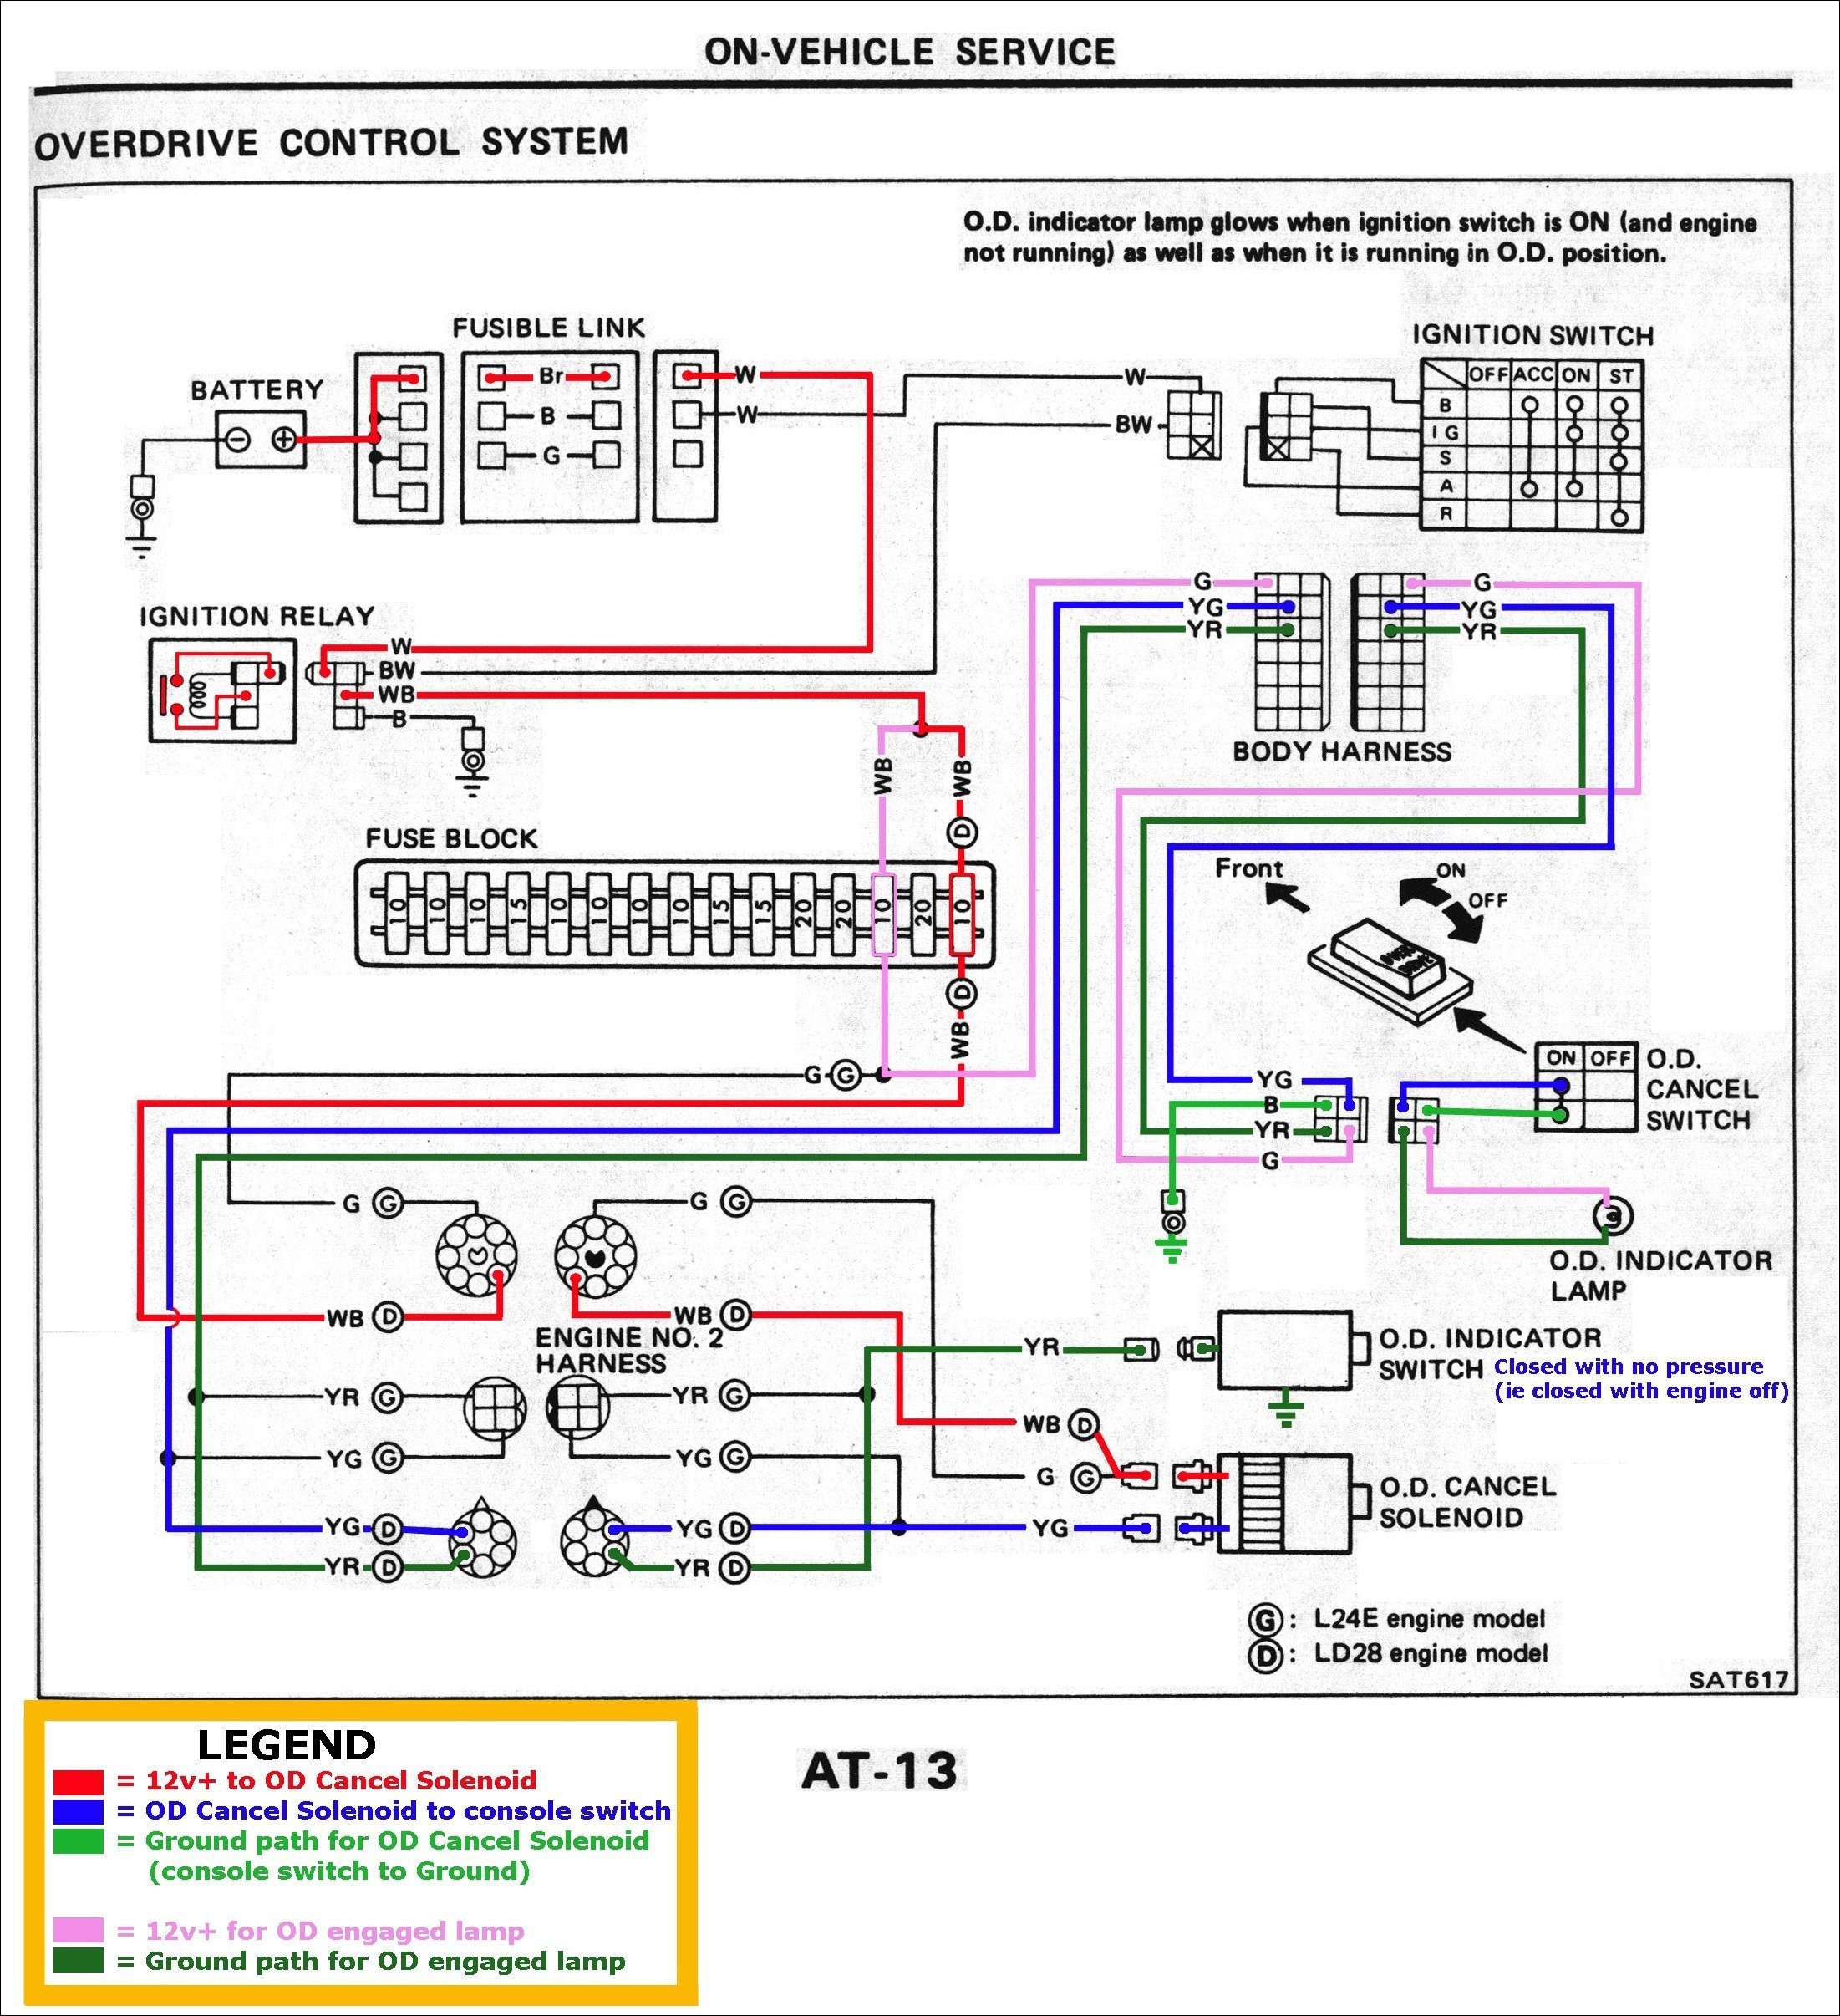 Volvo S60 Engine Diagram Electric Heater Schematic Symbol Get Free Image About Wiring Diagram Of Volvo S60 Engine Diagram